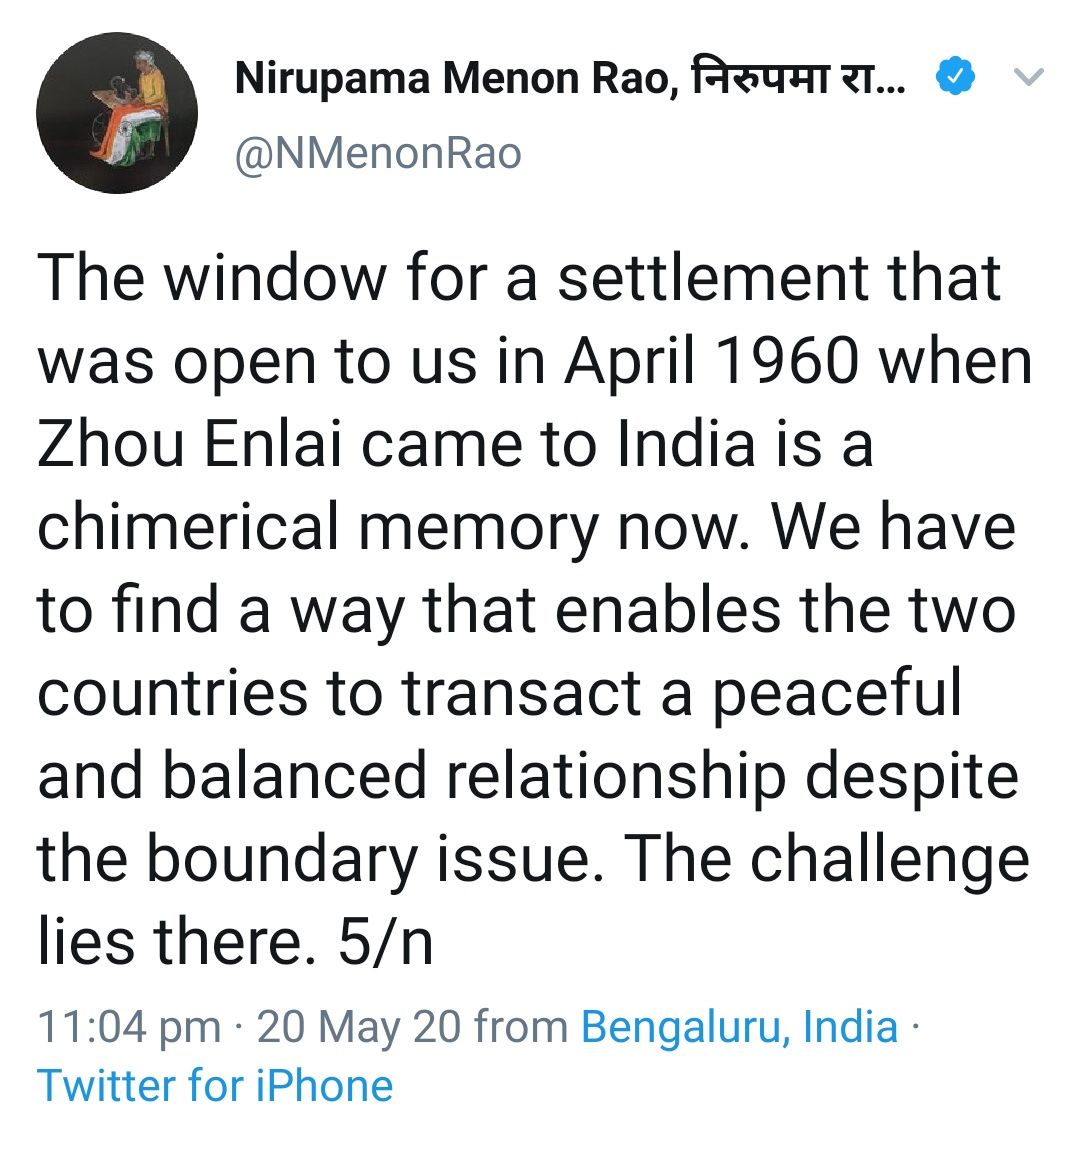 Unsurprisingly, Indian diplomats - both current and retired (including the Indian EAM himself) - themselves ponder whether it would've been better for Nehru to have accepted Zhou's package deal. https://mea.gov.in/Speeches-Statements.htm?dtl/32038/External+Affairs+Ministers+speech+at+the+4th+Ramnath+Goenka+Lecture+2019 https://twitter.com/NMenonRao/status/1263161224105095168?s=19